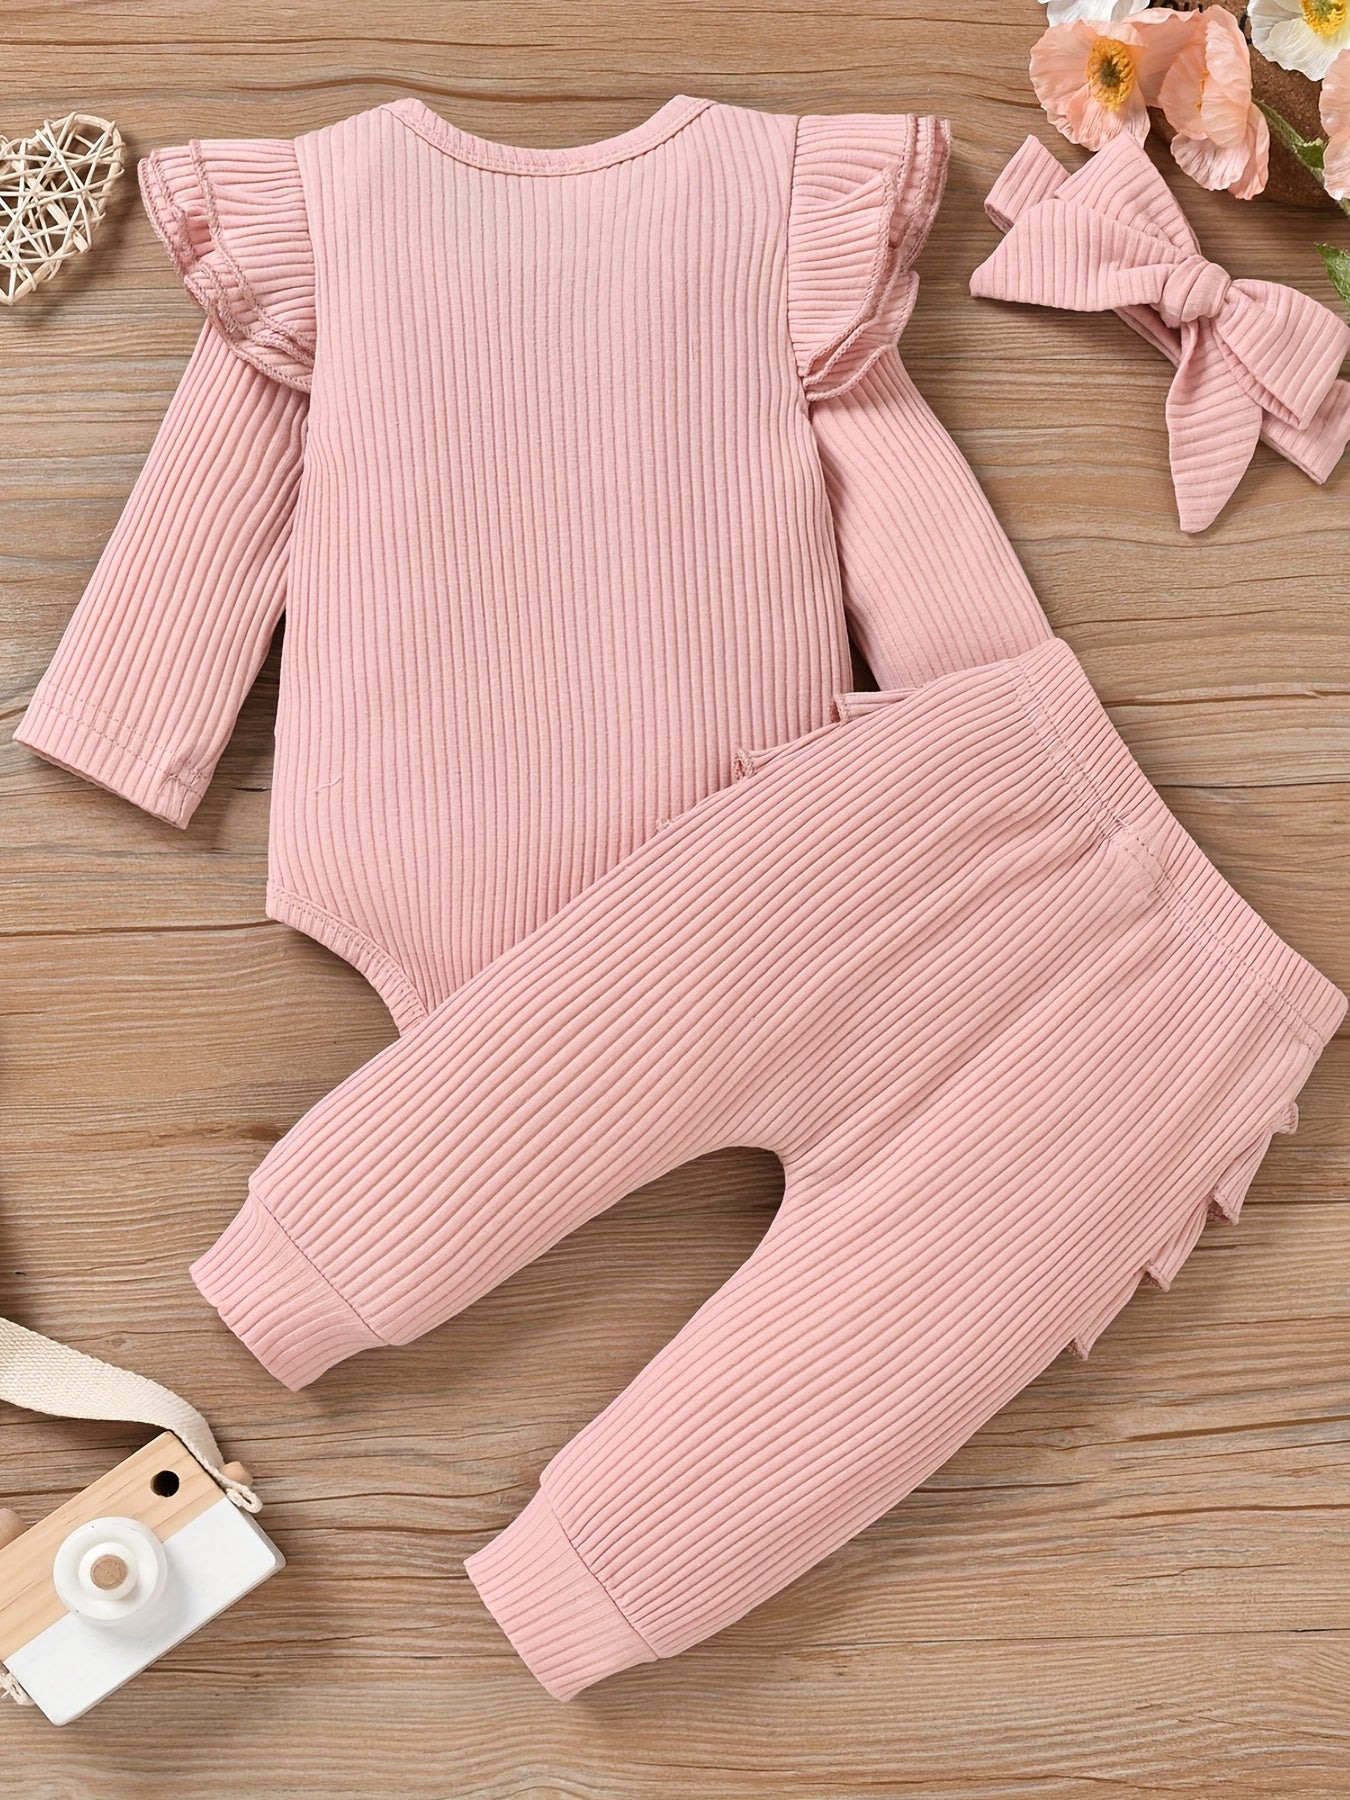 Baby Girl Clothes Newborn Romper Long Sleeve Infant Outfits 3Pcs Ruffle Tops + Pants + Headband 0-18 Months